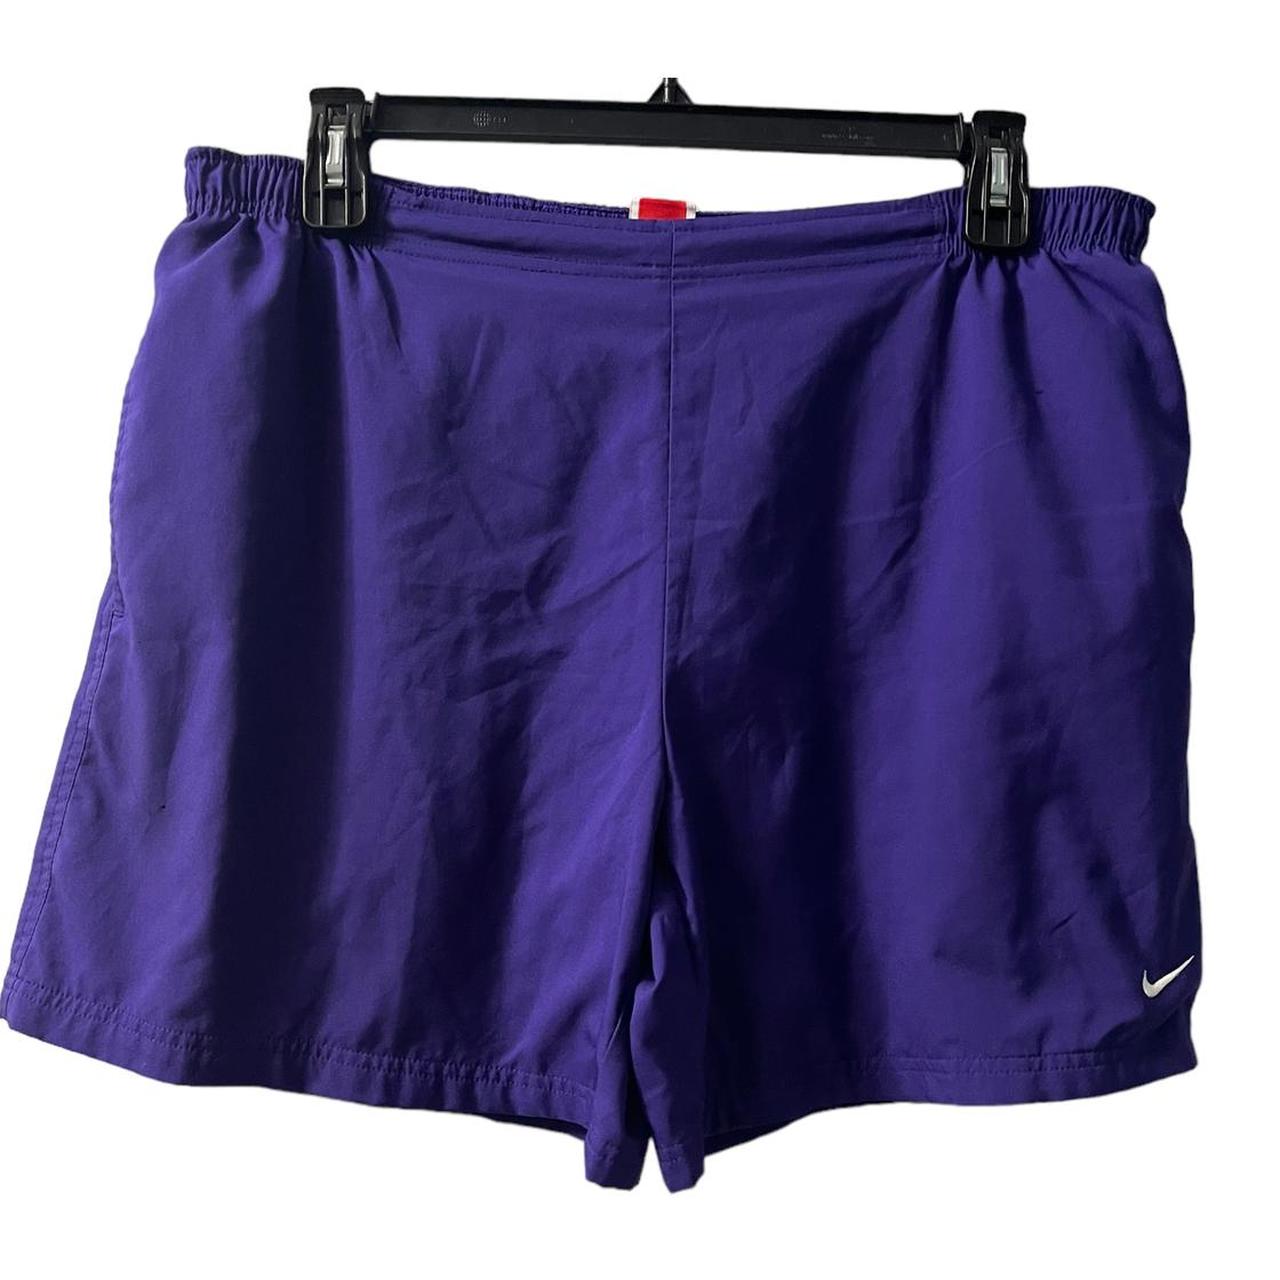 Purple workout shorts. They're great quality, very - Depop